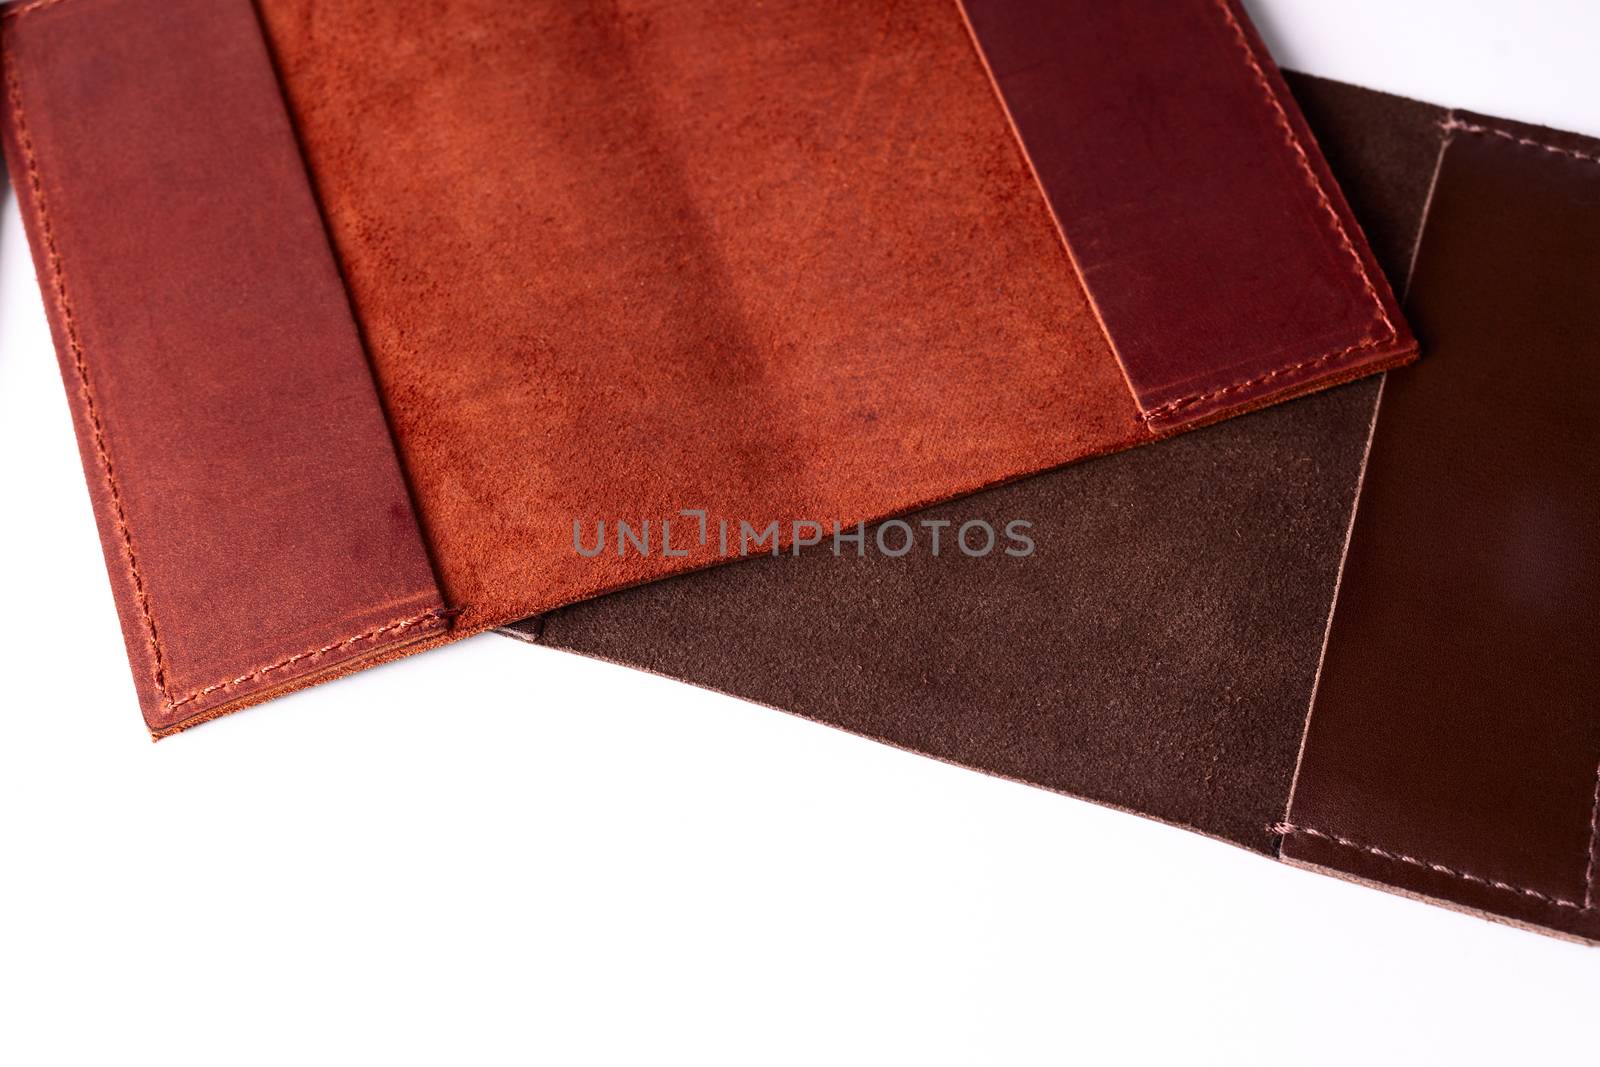 Two handmade leather passport covers isolated on white background. Closeup view. Covers are red, brown and open.